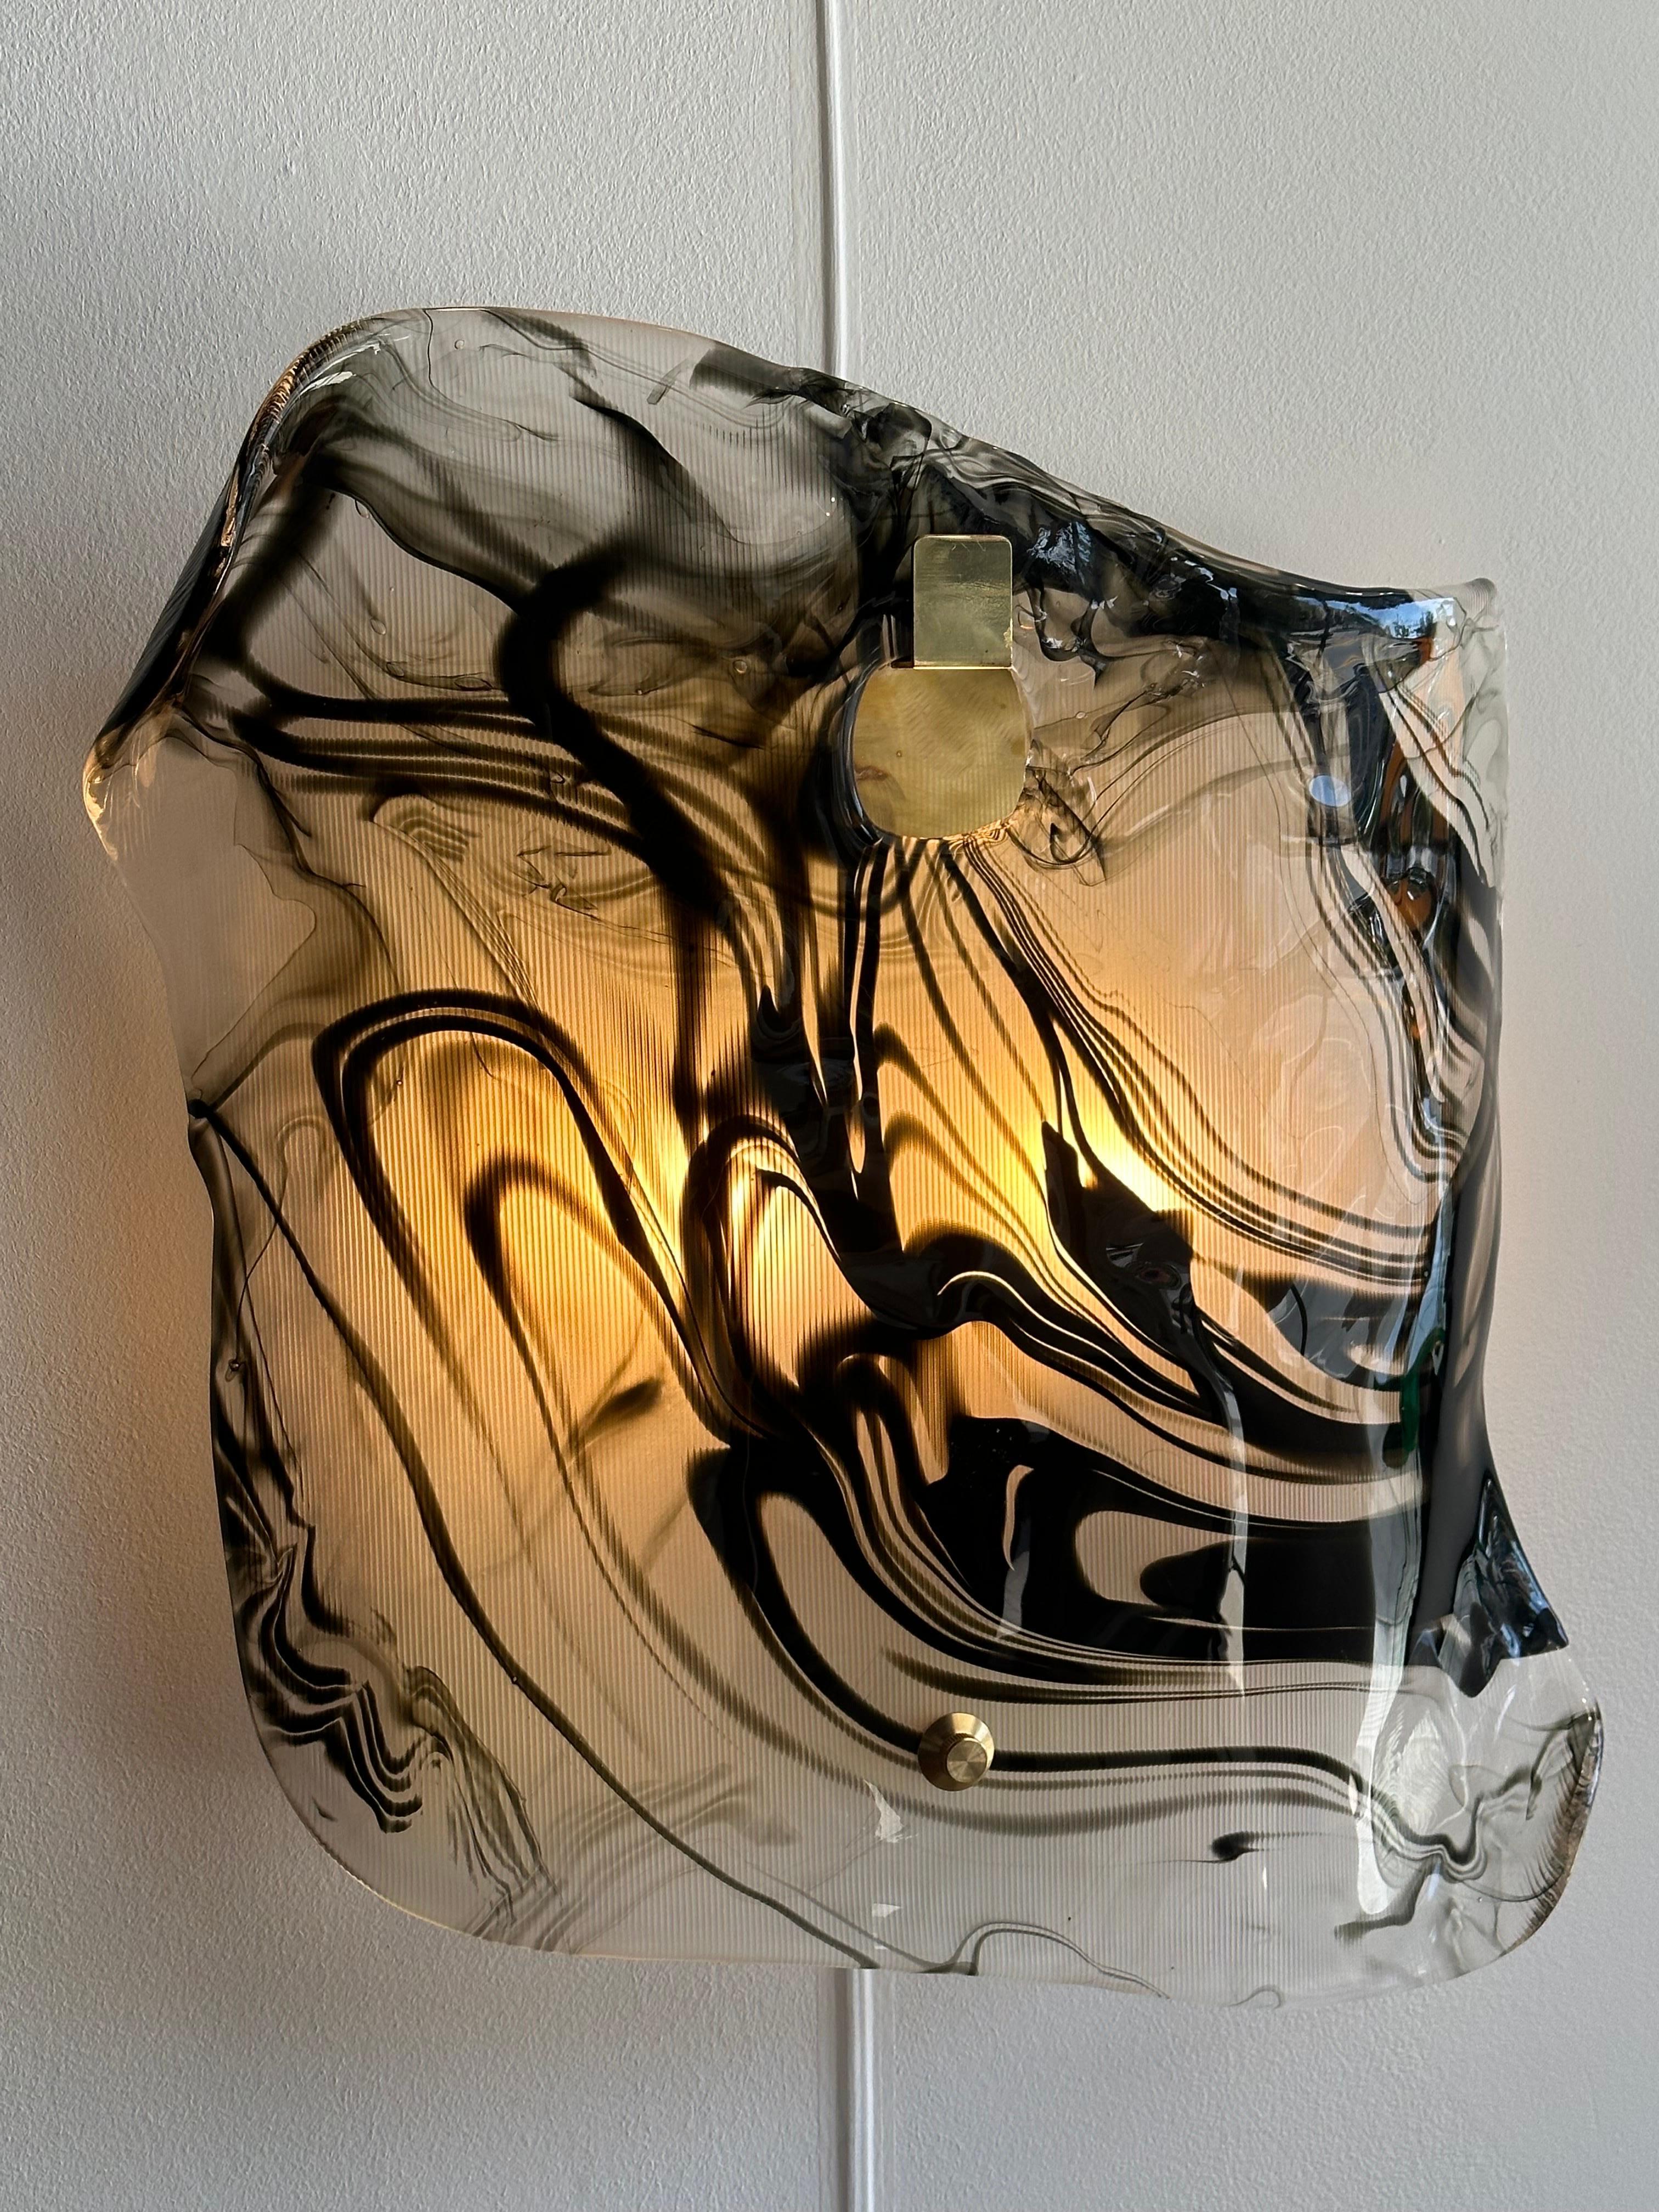 This outstanding pair of heavy glass sconces in a wavy and fluid design, opaque and wavy black inclusions. Hanging from a brass plate with TWO candelabra style sockets. VERY whimsical and sculptural. Large in scale - extremely unique. TWO pairs are